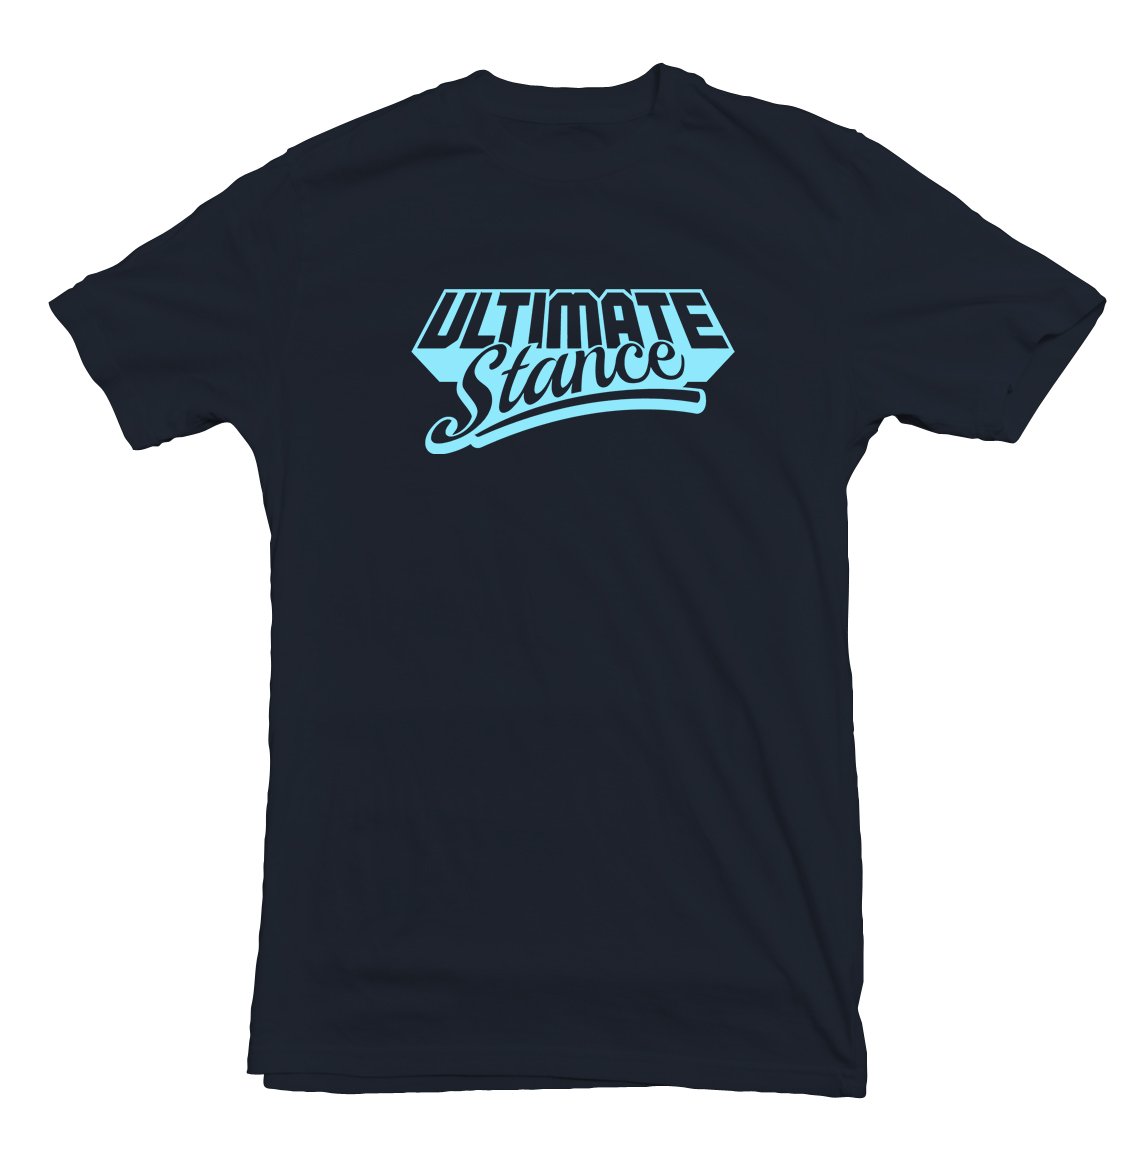 Image of Men's Ultimate Stance T-Shirt - Navy with Pale Blue Logo